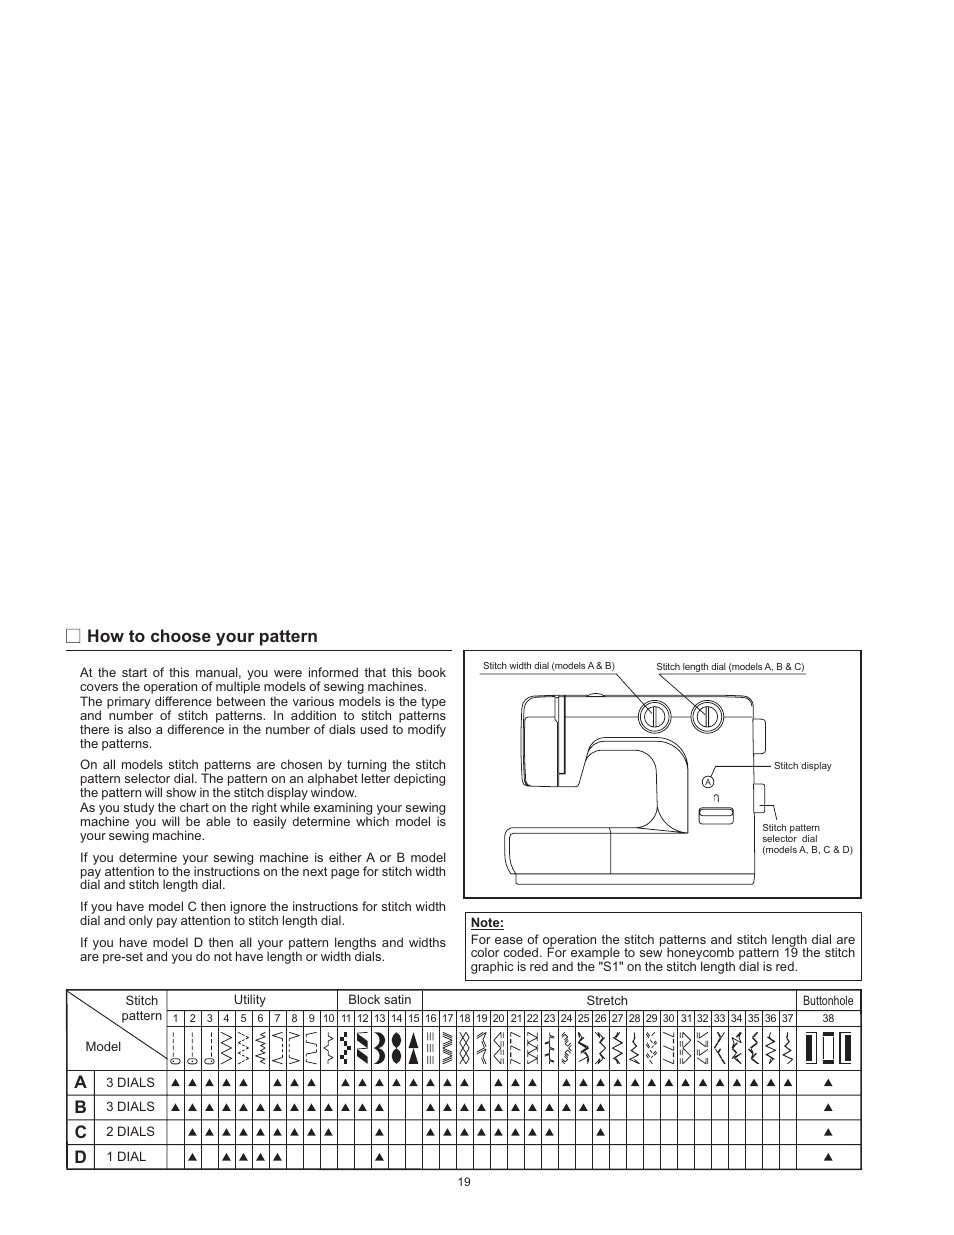 How to choose your pattern, Ab c d | SINGER 1120 User Manual | Page 22 / 38